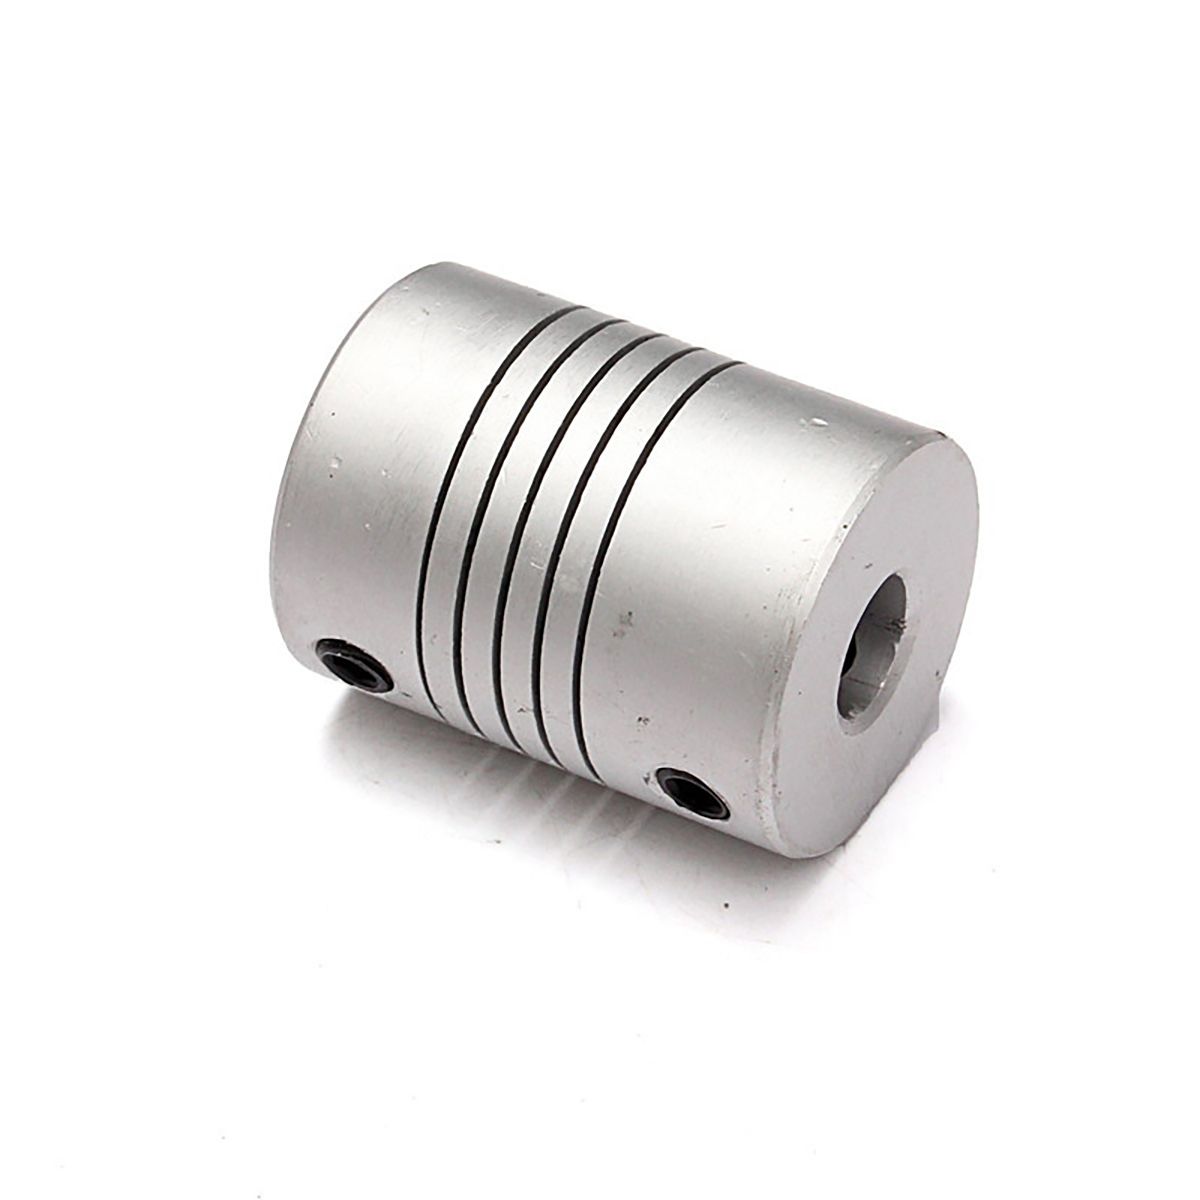 Machifit-T8-100-1000mm-Stainless-Steel-Lead-Screw-with-Shaft-Coupling-and-Mounting-Support-CNC-Parts-1646537